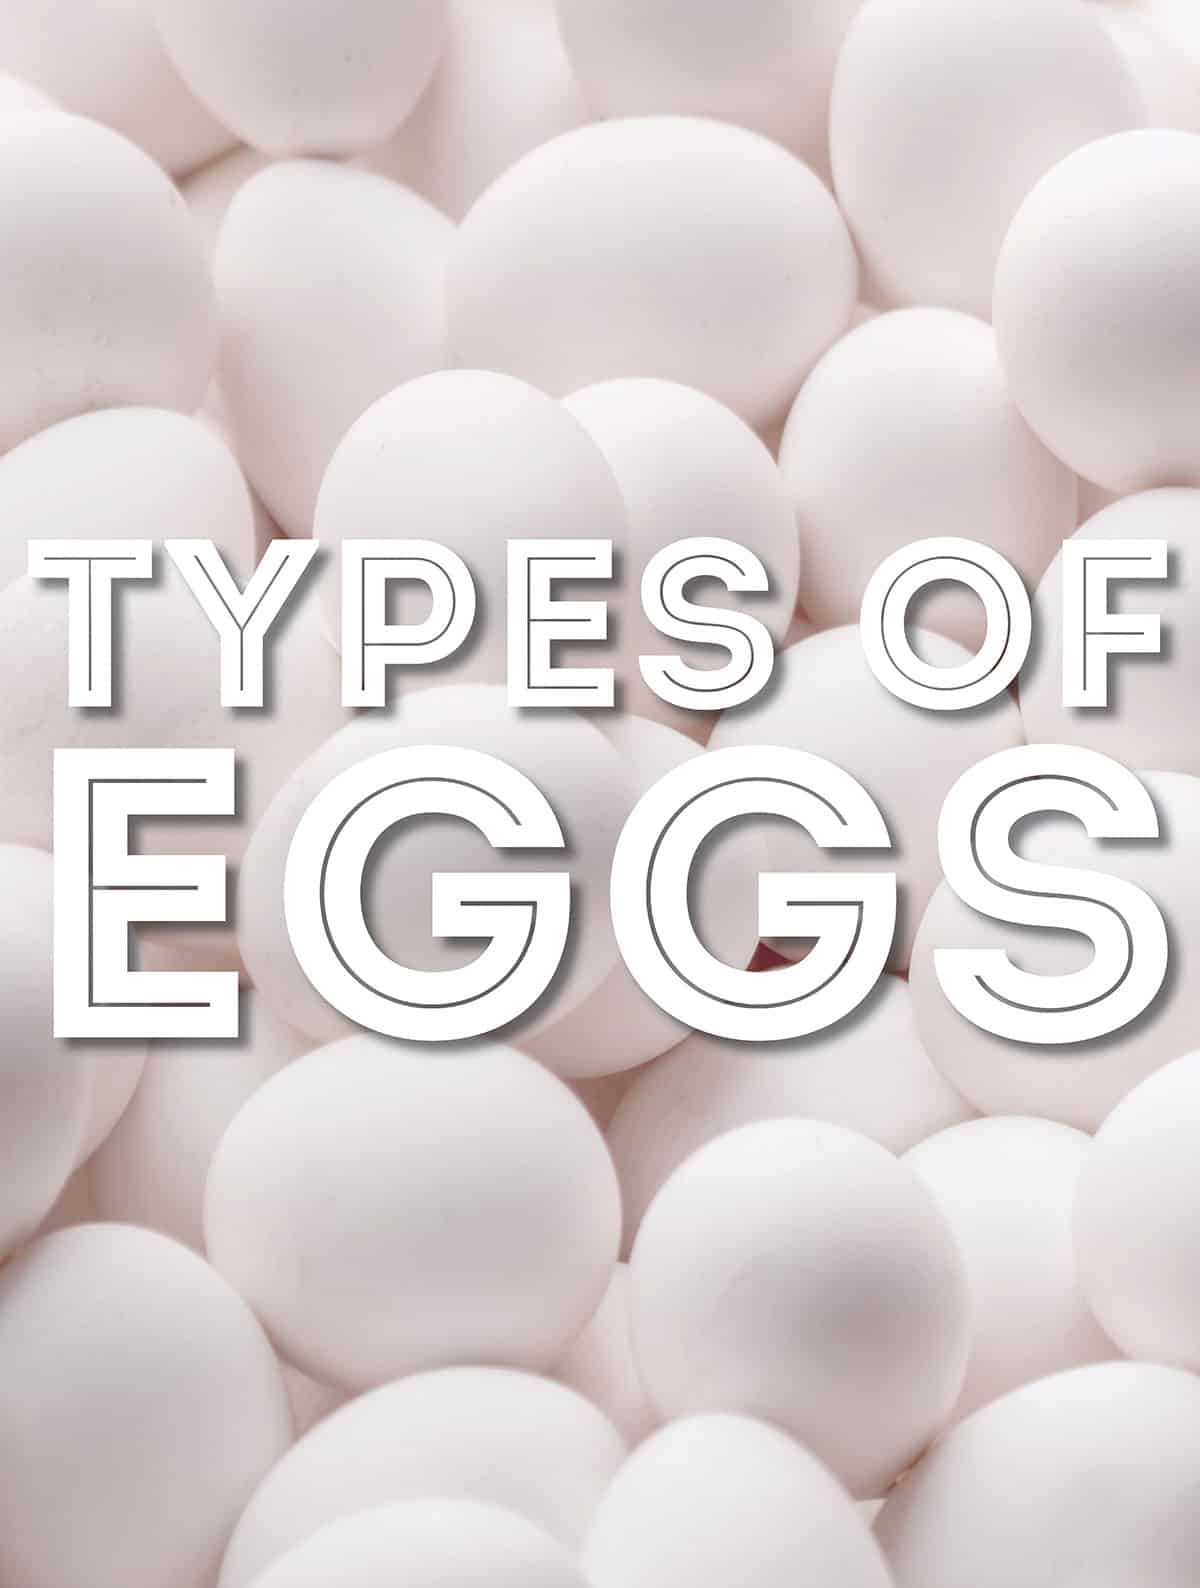 Collage that says "types of eggs".